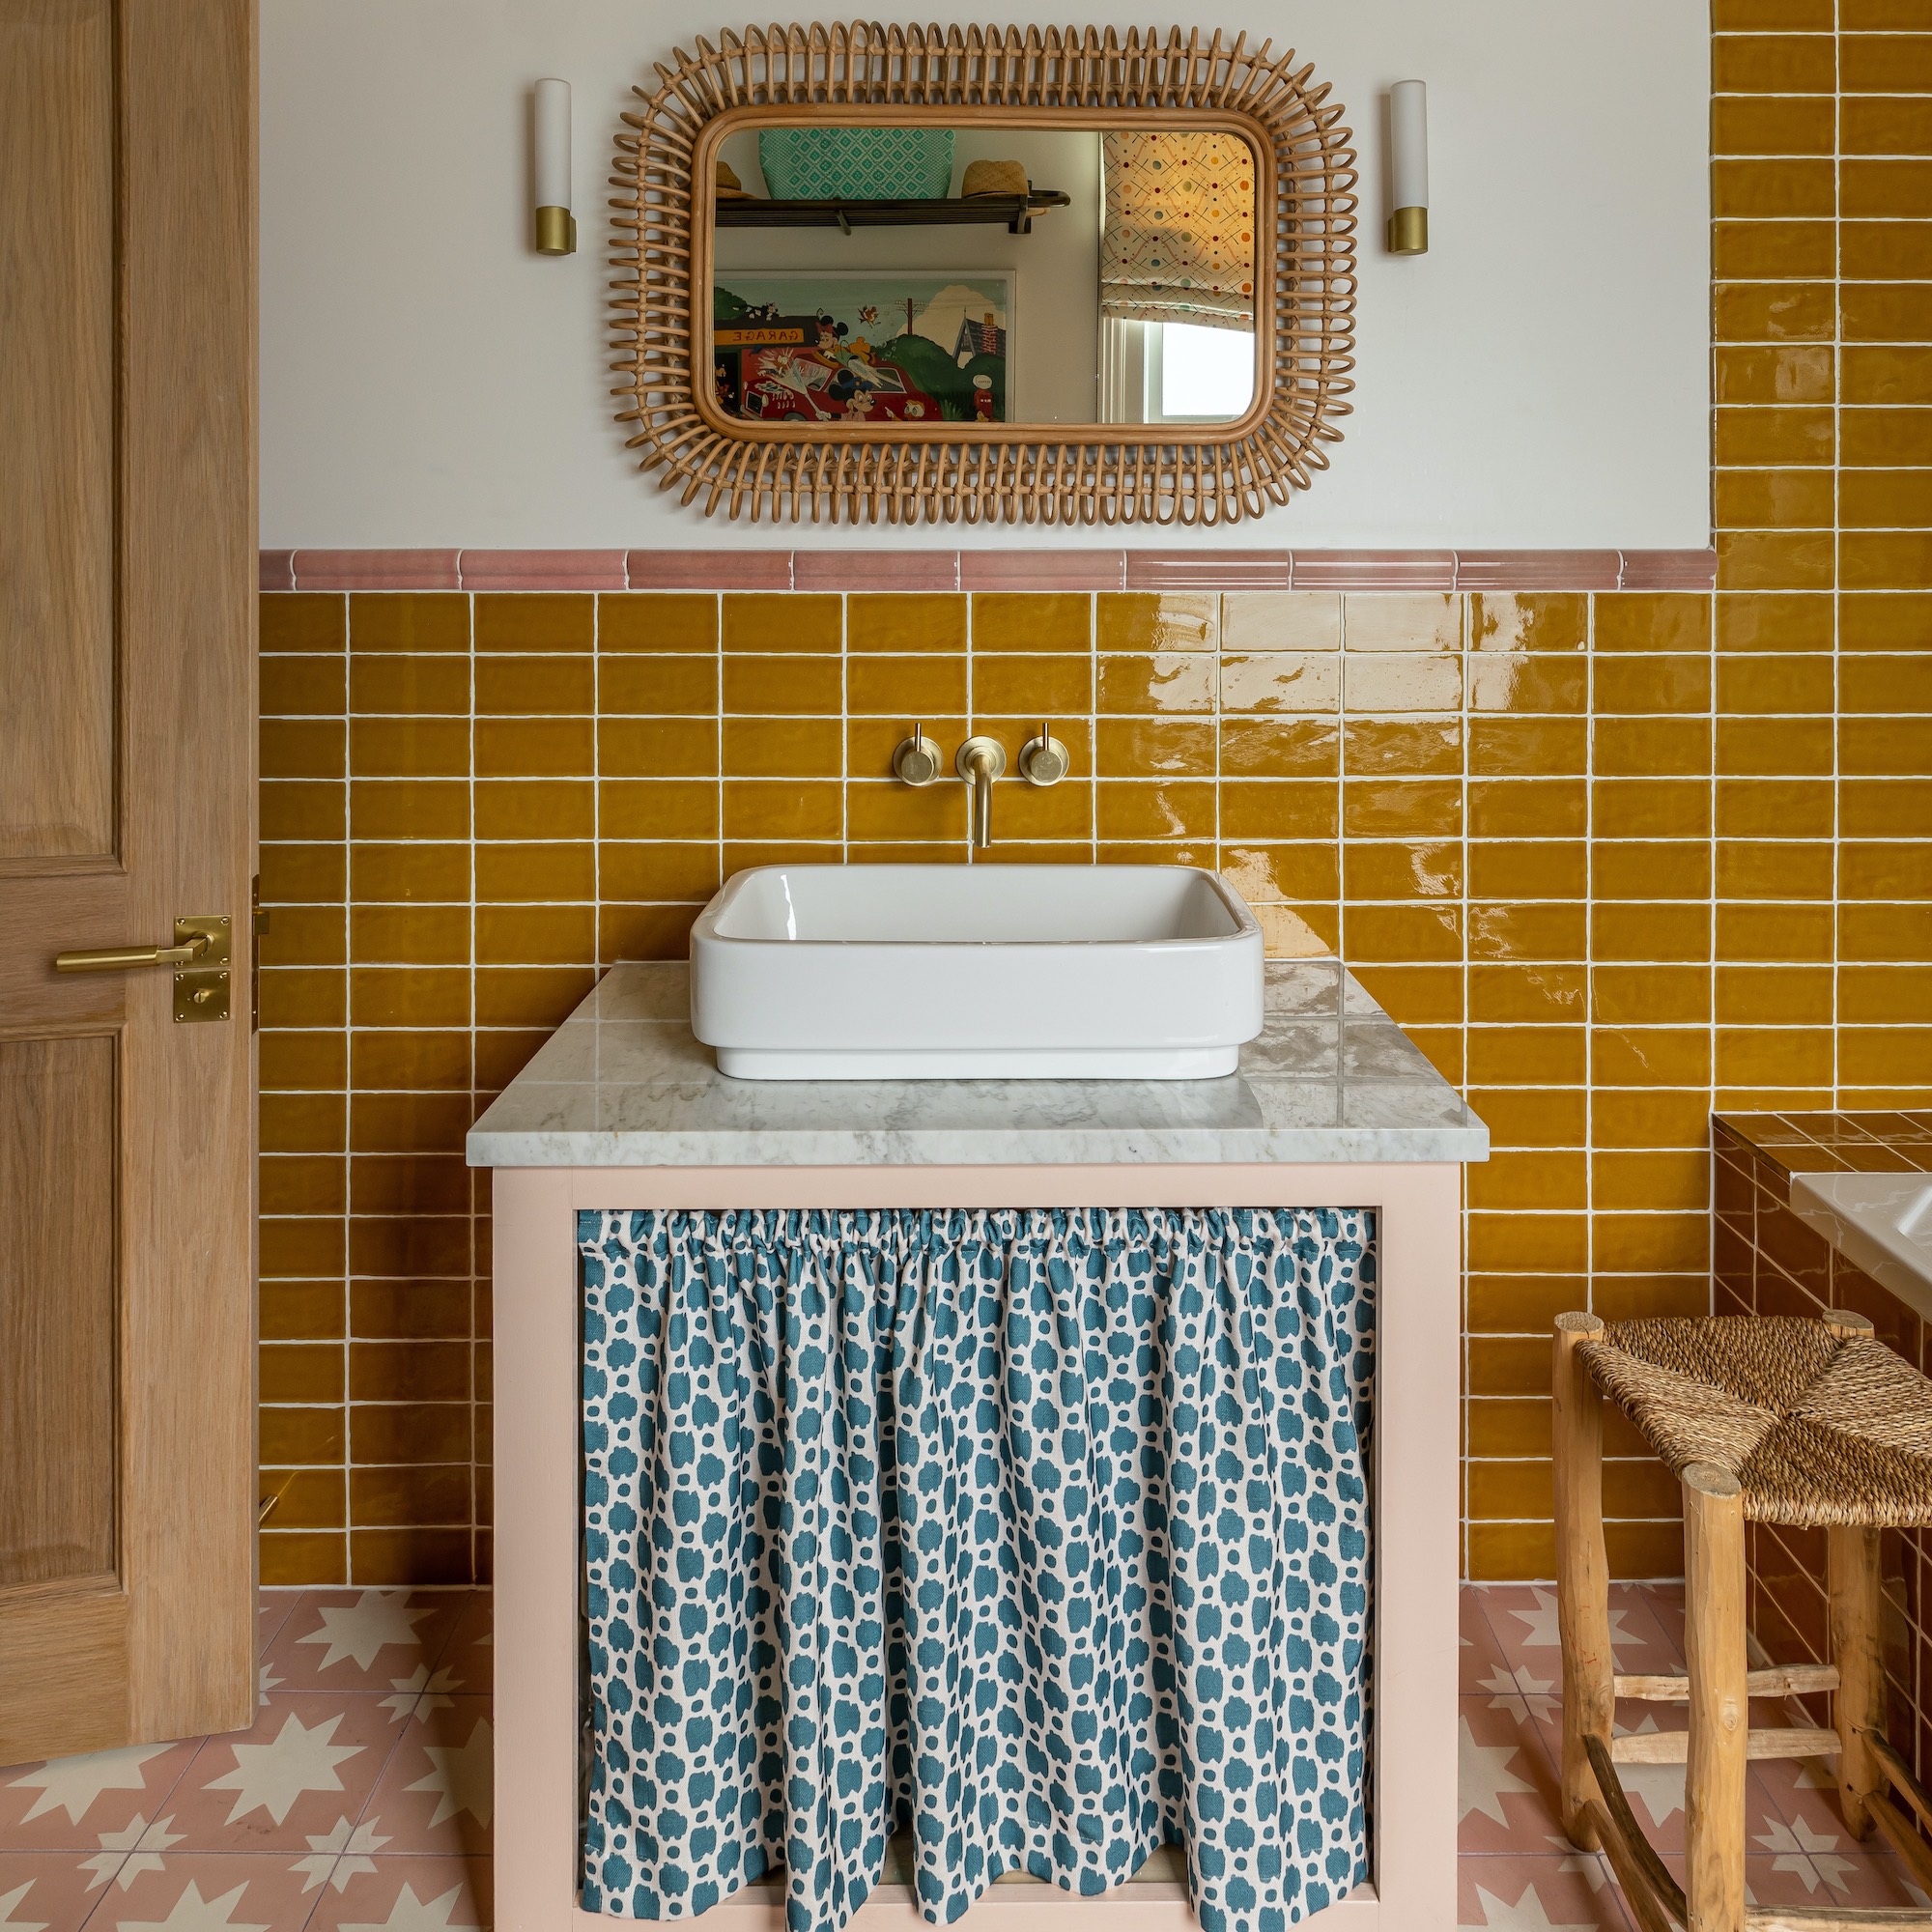 sink unit with curtain and mustard tiles